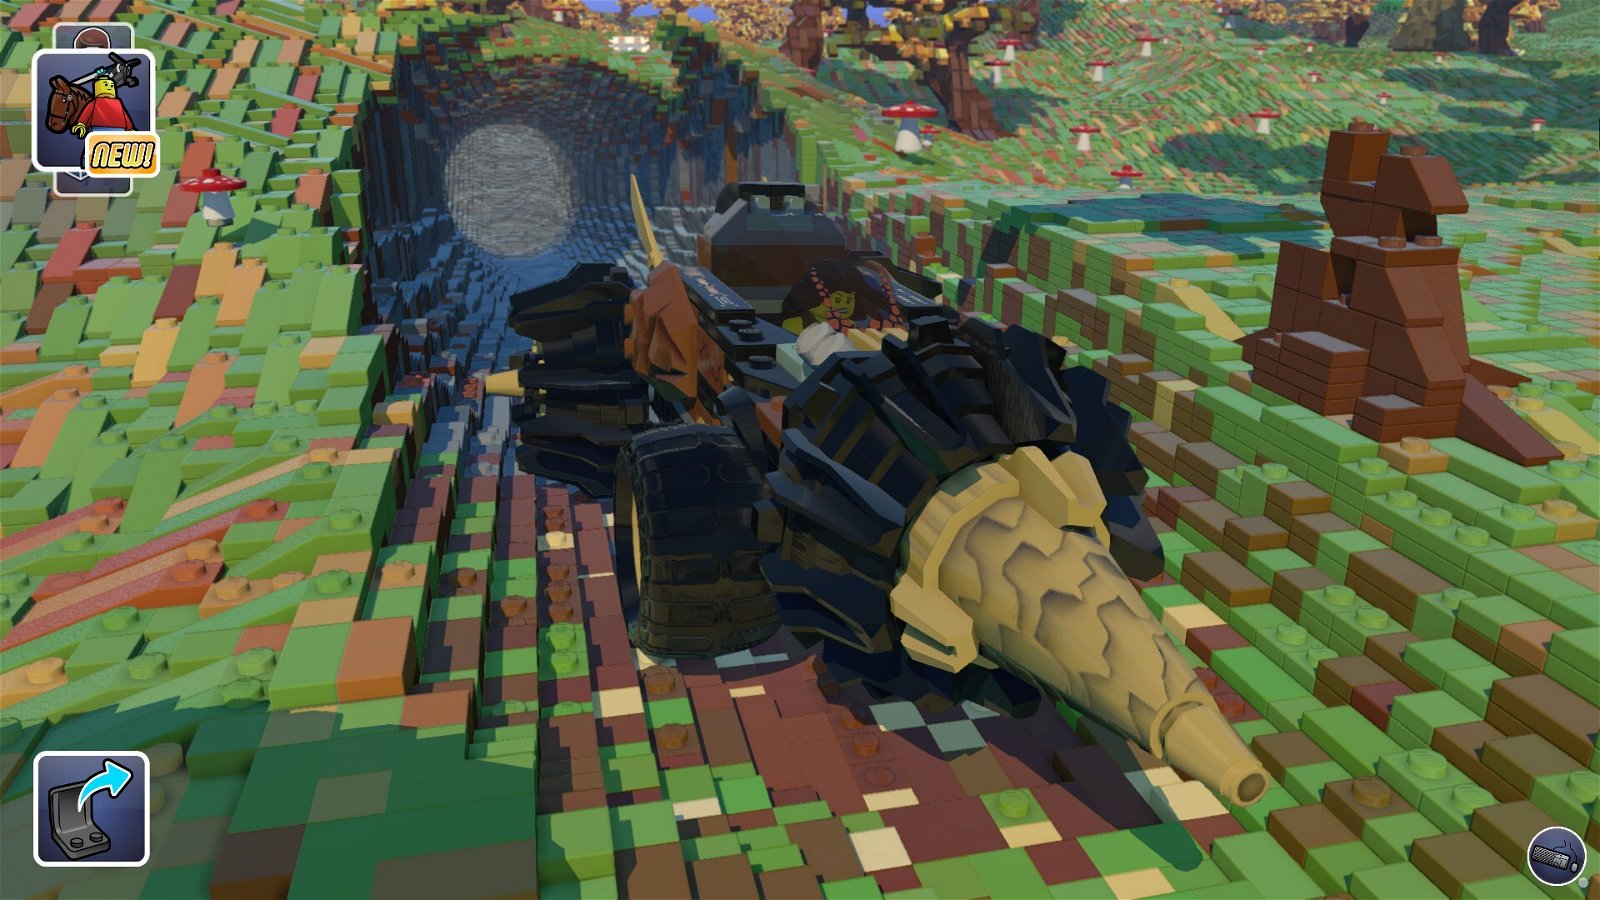 Lego Takes On Minecraft: A Preview Of Lego Worlds